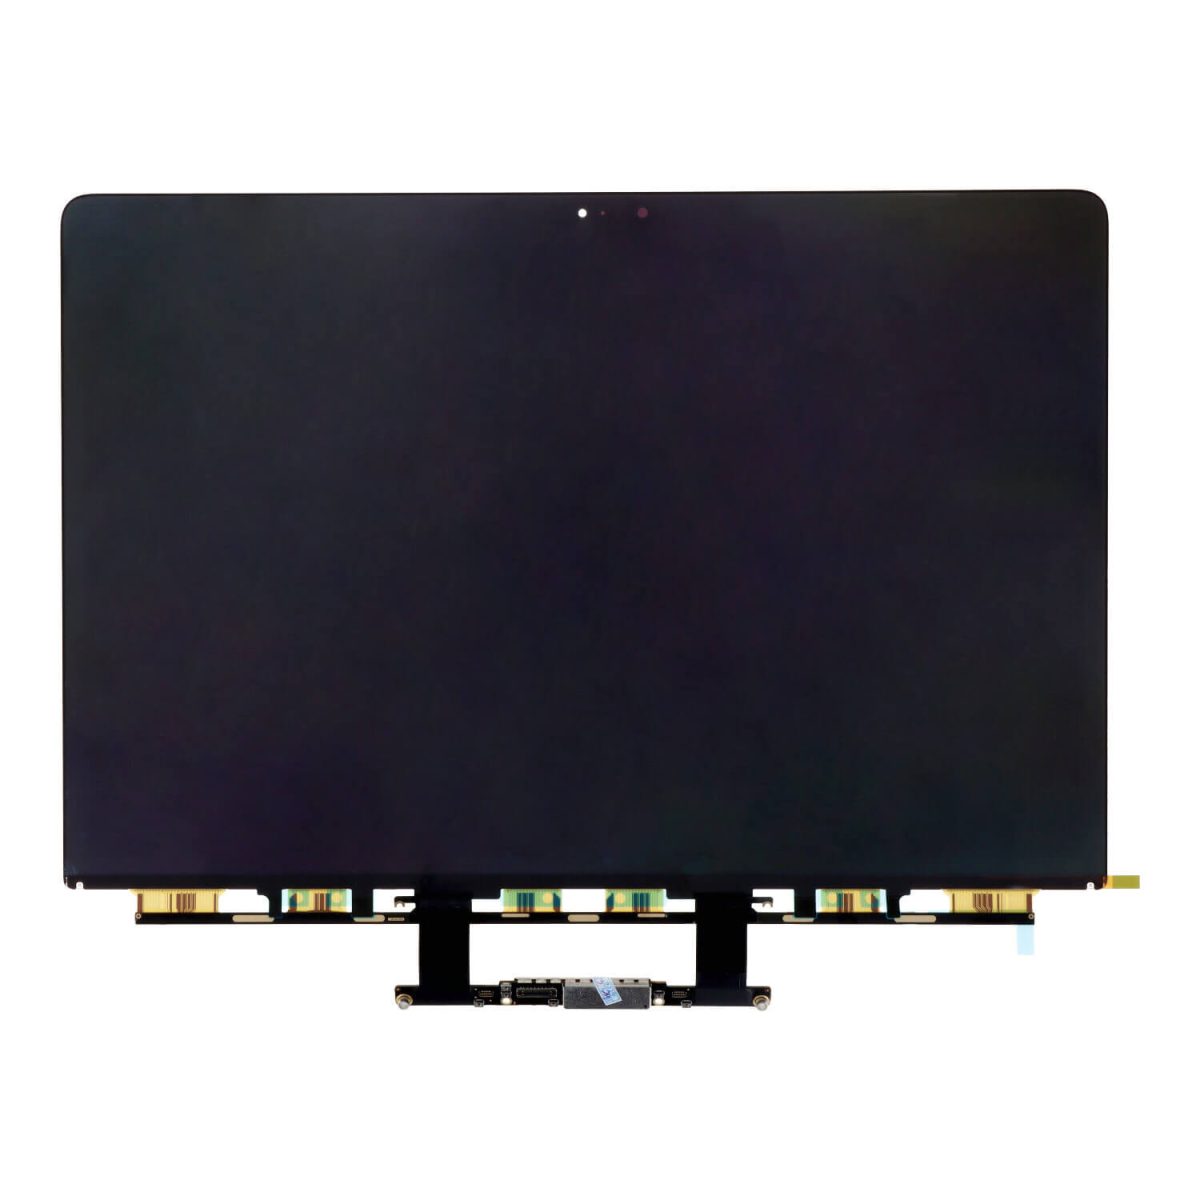 LCD Display Replacement for Macbook Air 13.3 M1 A2337 - No Frame Version (OEM)